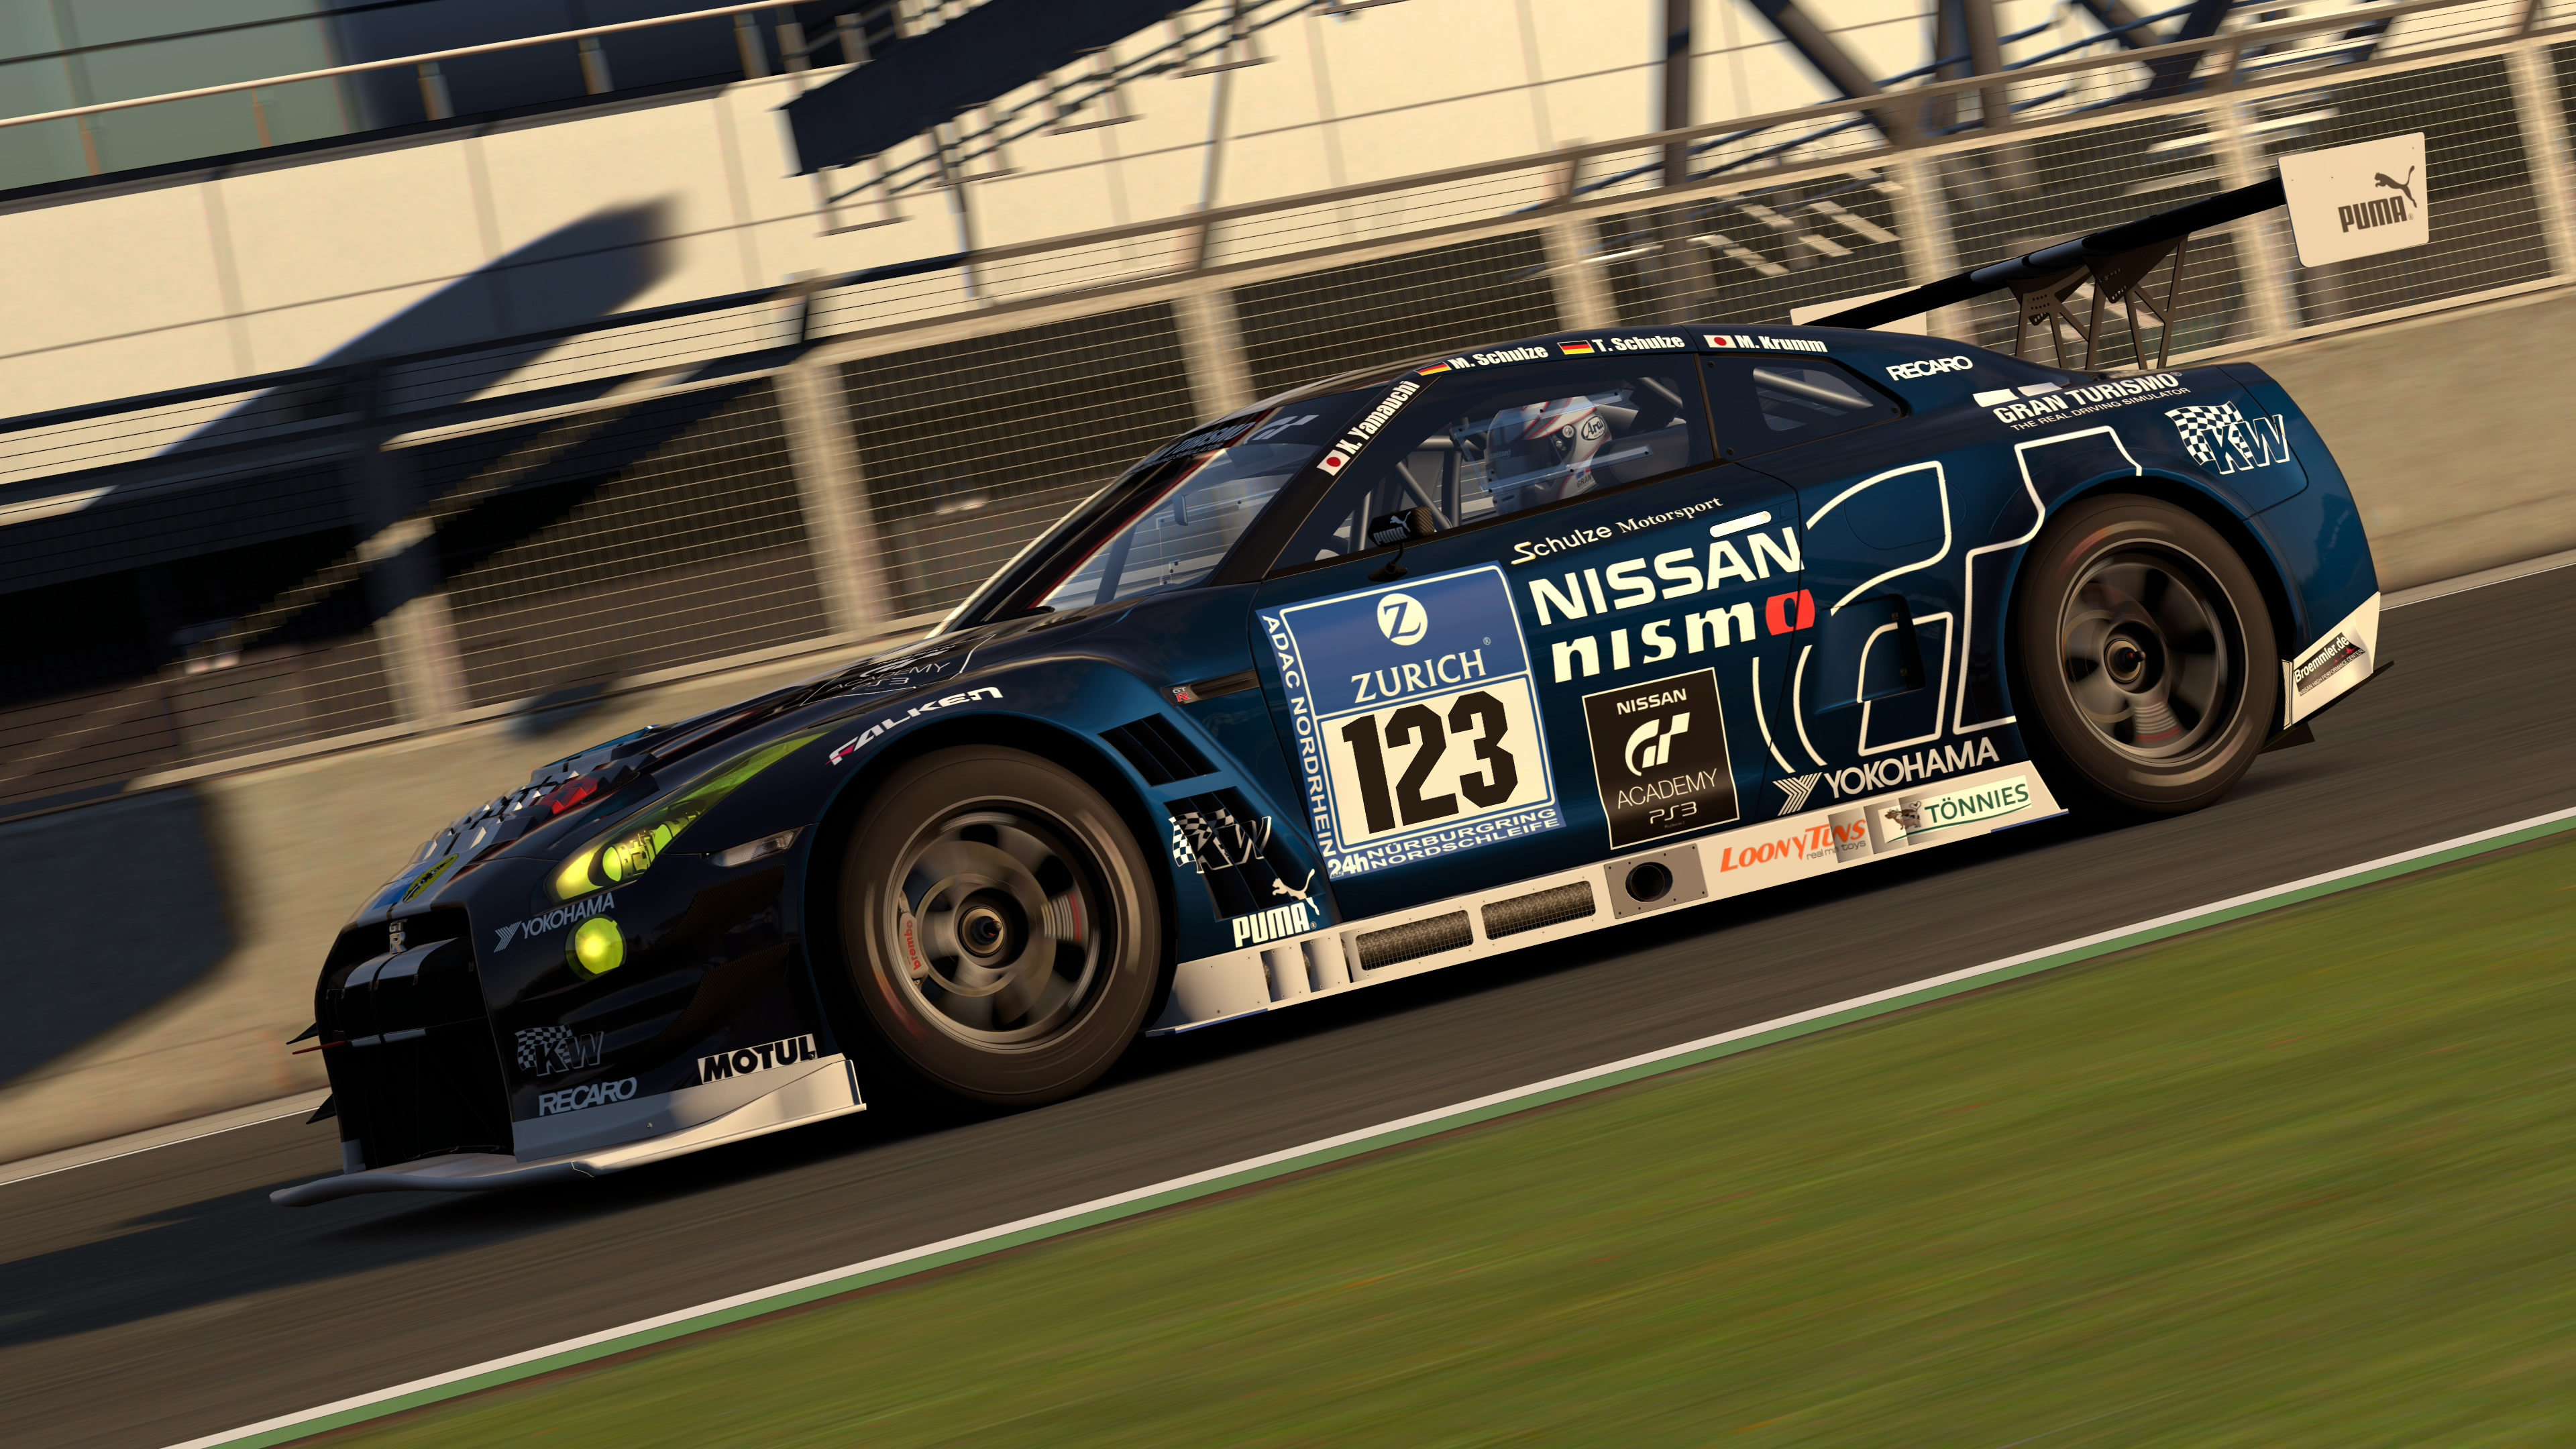 PS4 s First Gran Turismo Game Will Be Stuck At The Start Line For A 